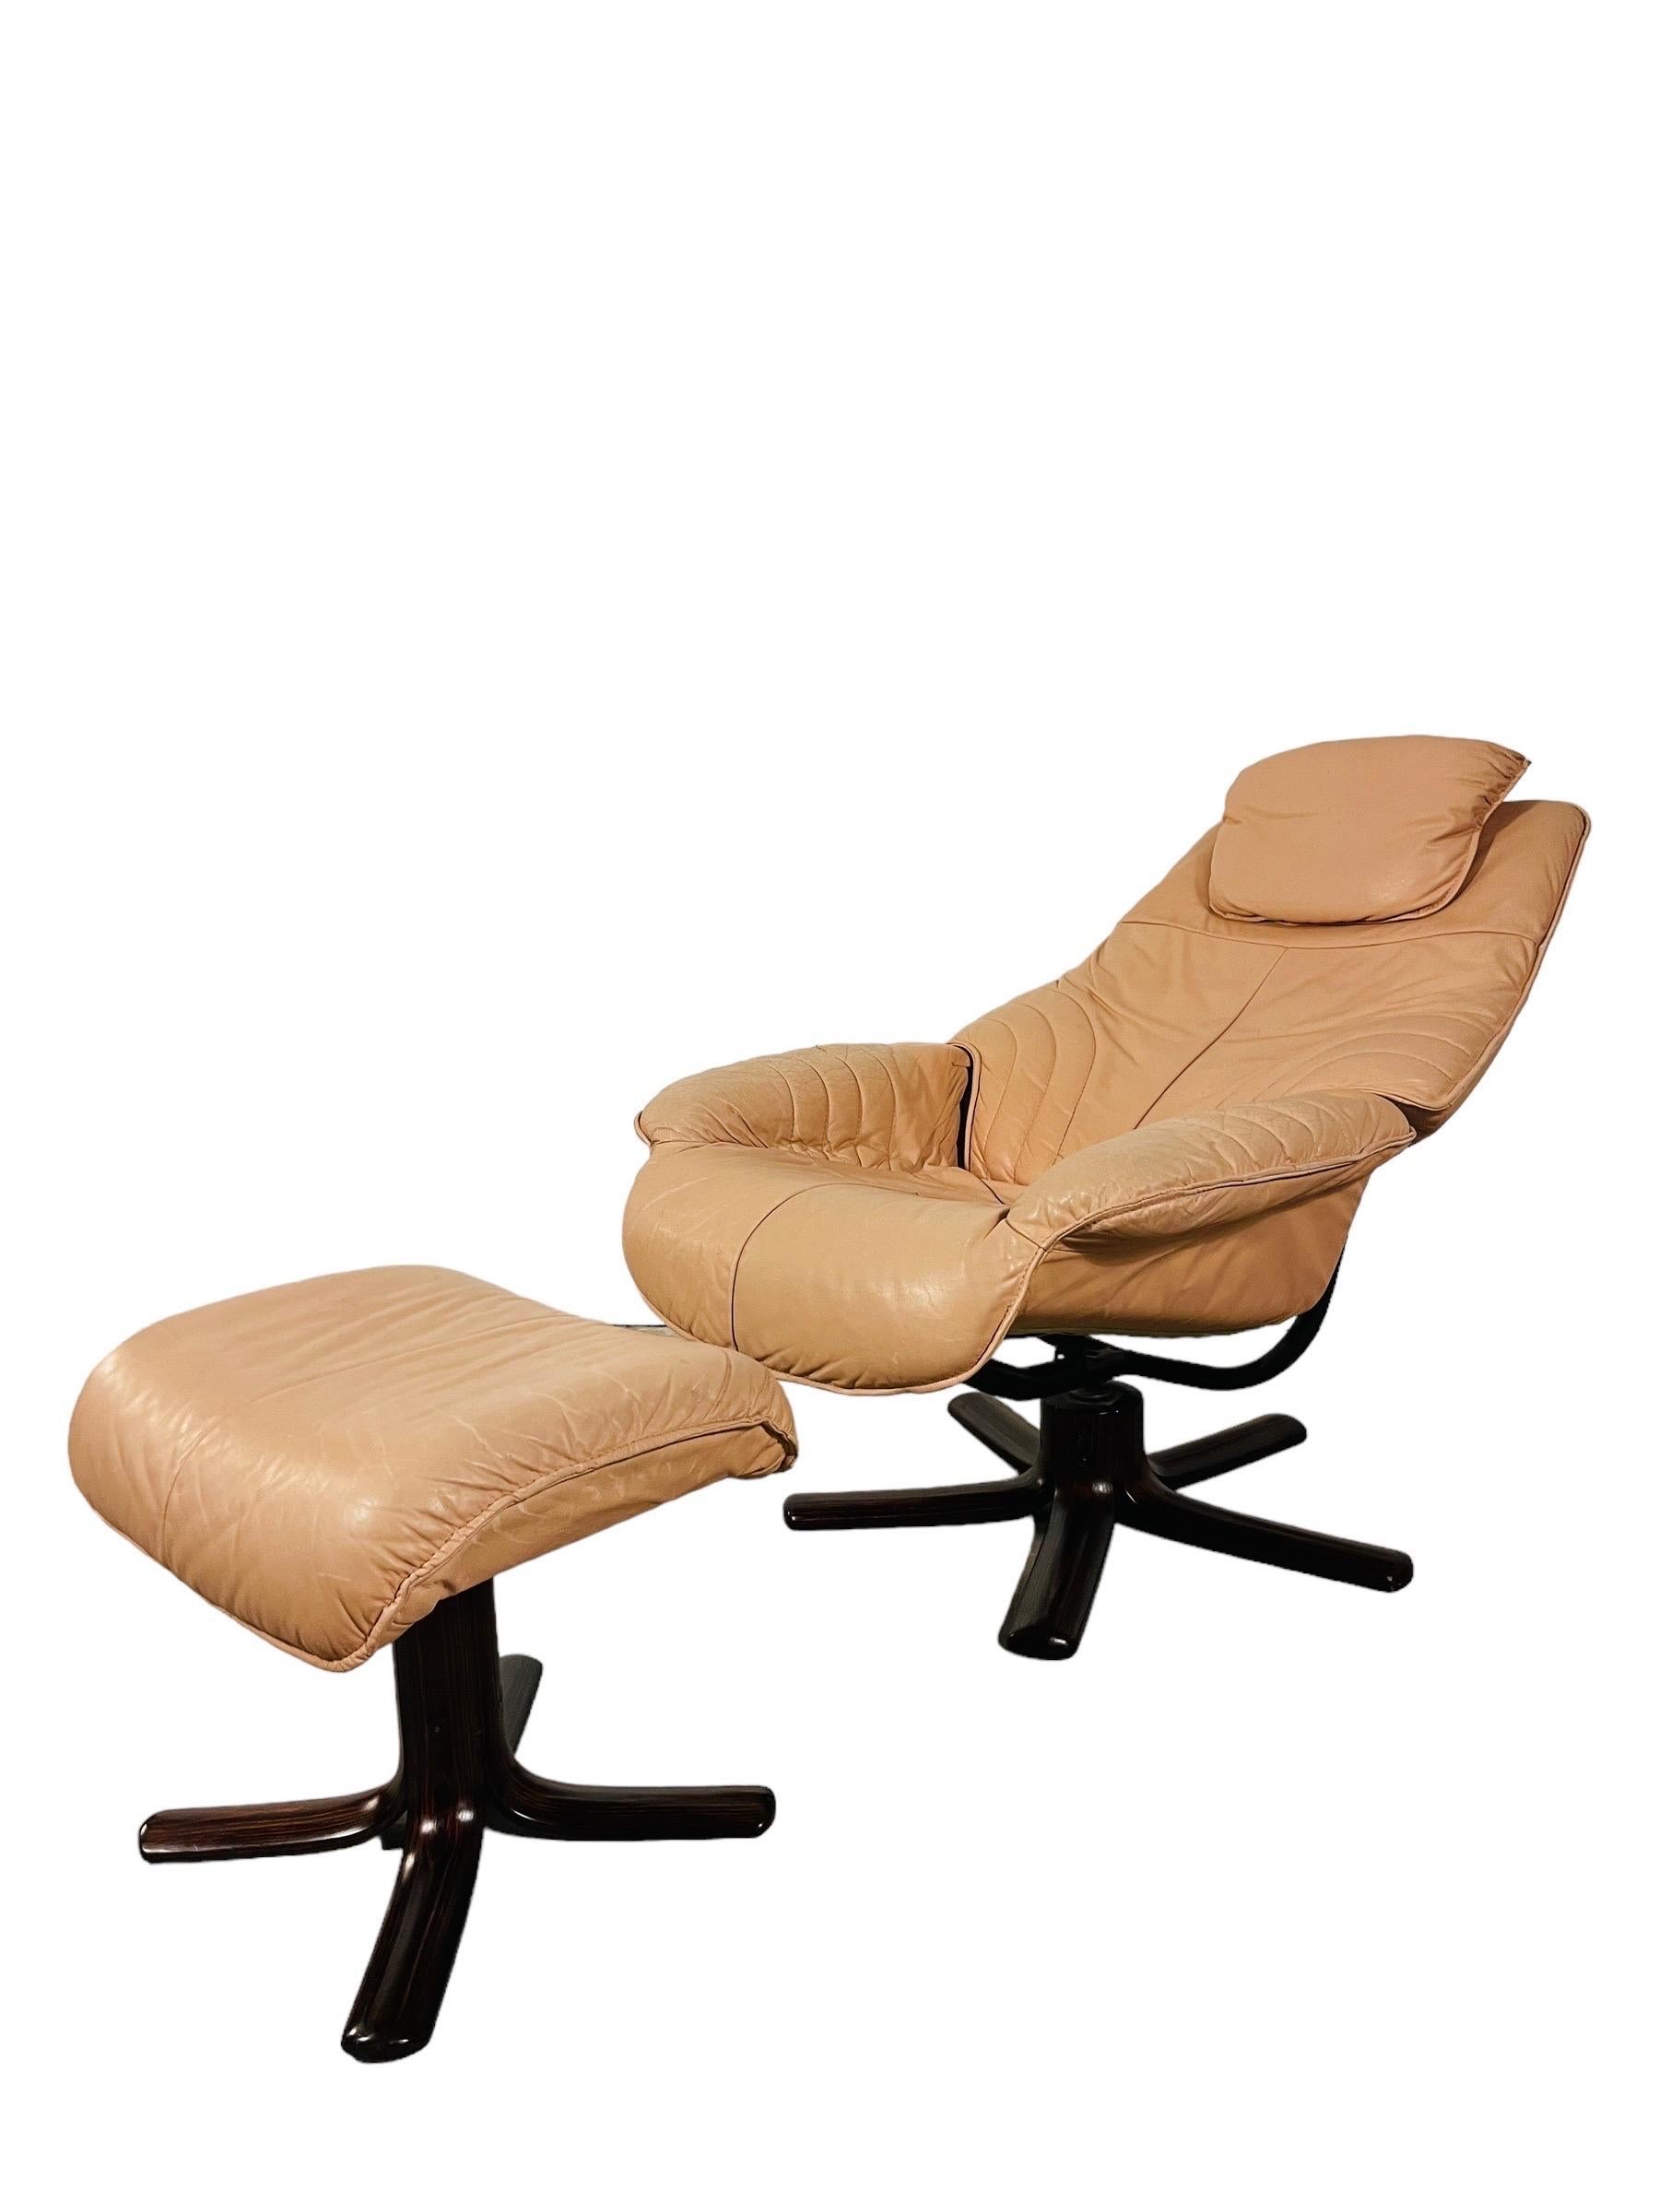 Step into the realm of classic Norwegian design with this vintage Hjellegjerde leather lounge chair and ottoman. Crafted in Norway, this ensemble epitomizes luxury and comfort. The supple champagne leather upholstery is a testament to quality,